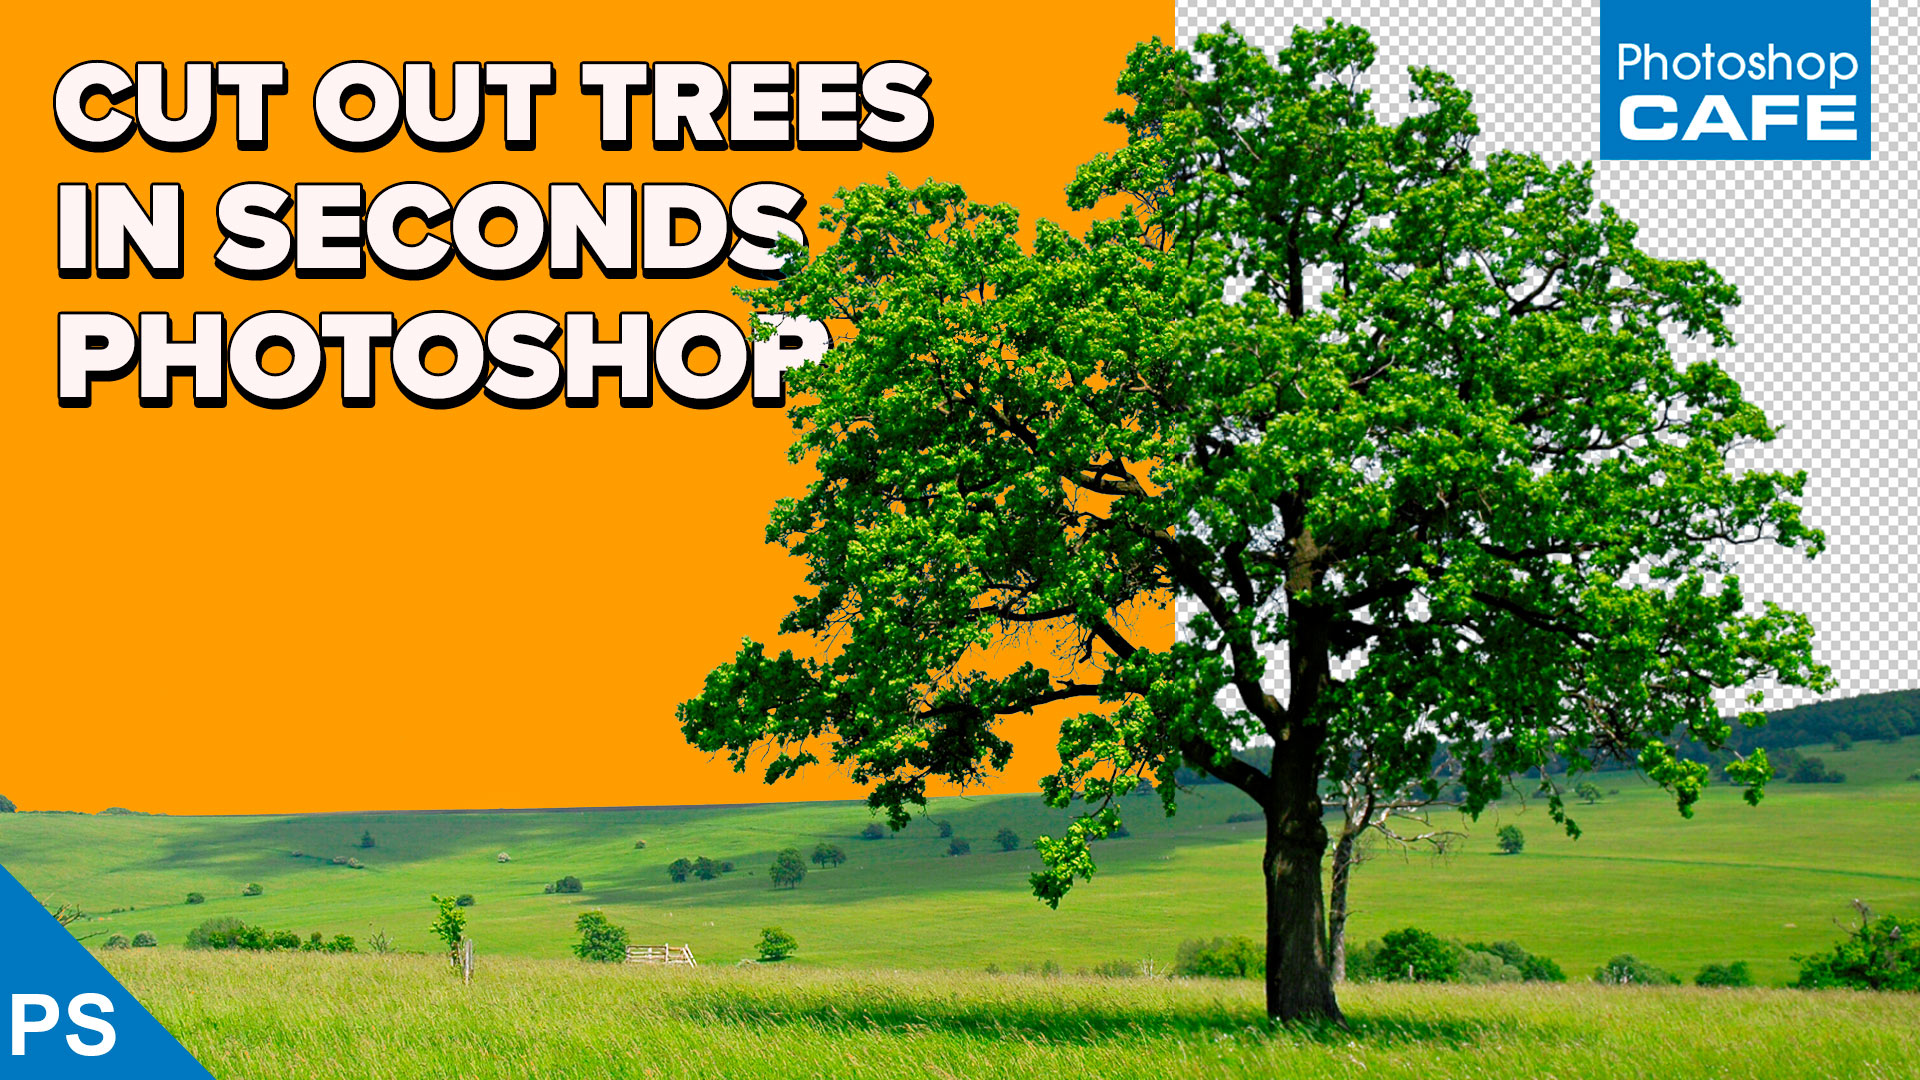 How to cut out trees quickly in Photoshop tutorial - PhotoshopCAFE